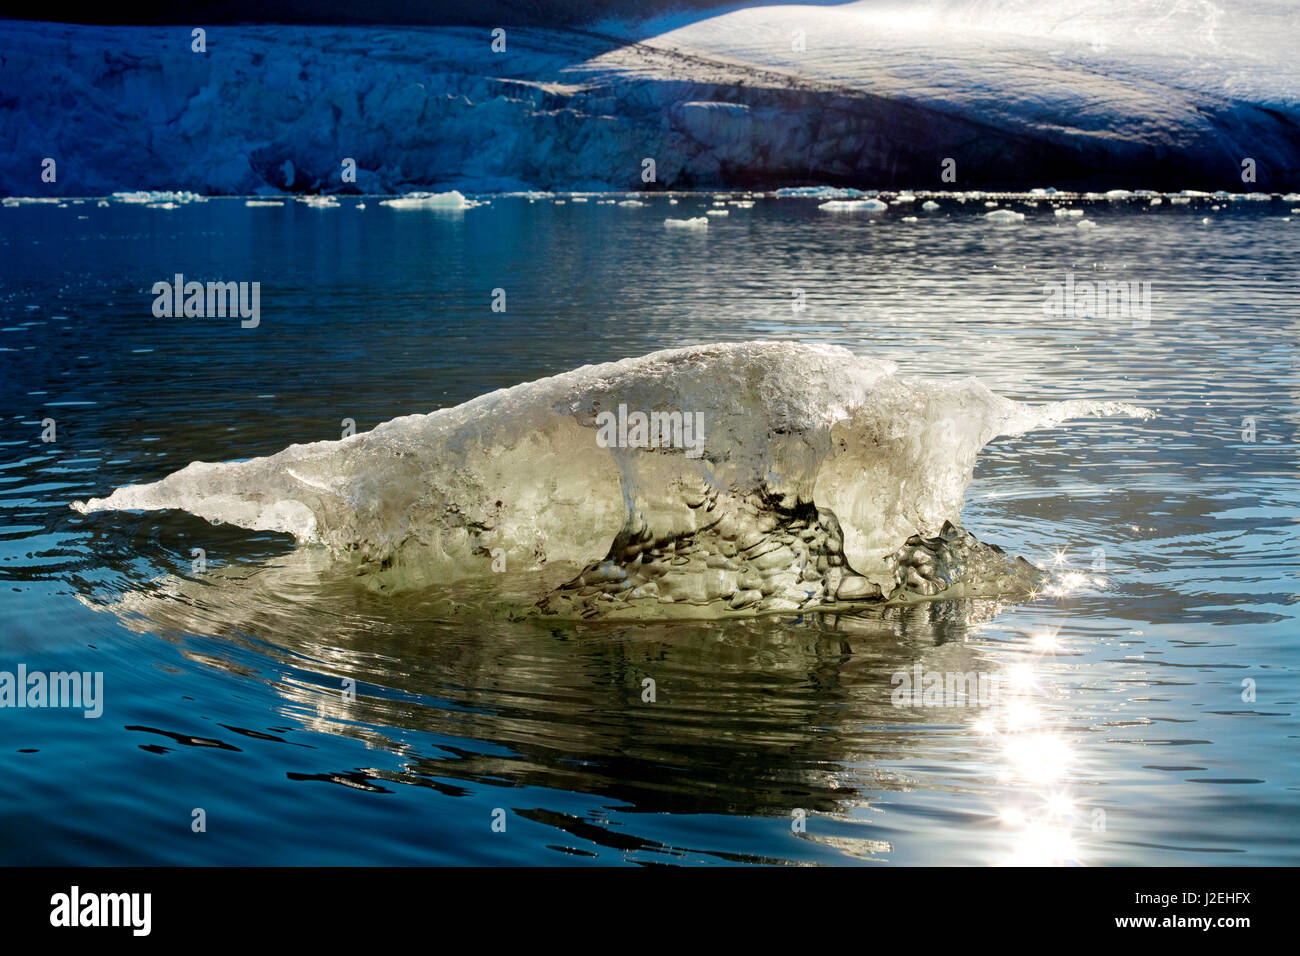 Arctic, Svalbard. Mud laden iceberg from a glacier melts after calving into the sea. Stock Photo